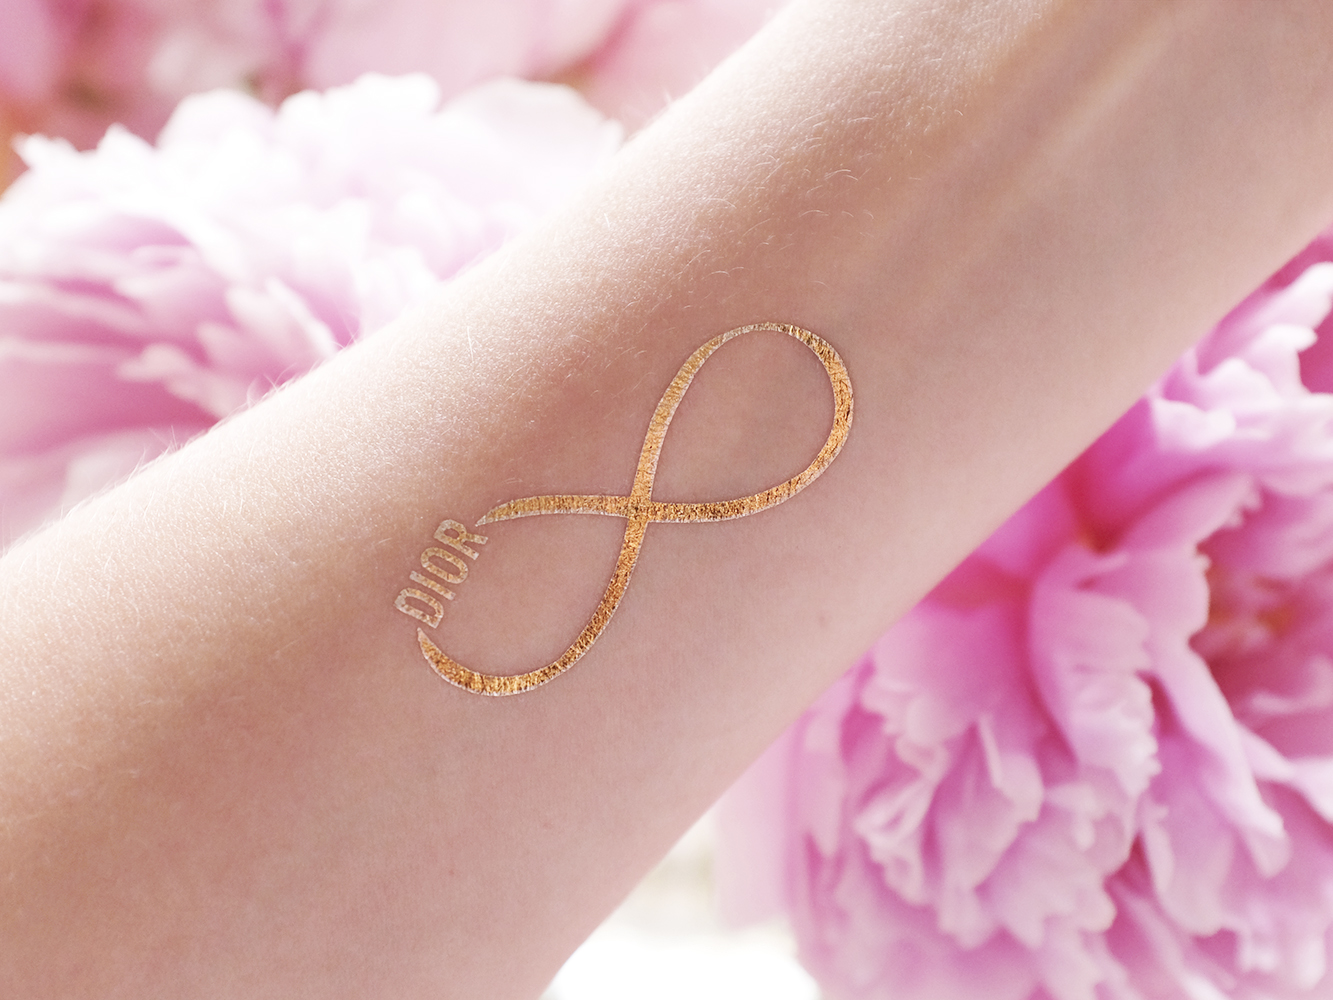 dior-flash-tattoos-being-a-woman-series-international-women-day-march-8th-temporary-tattoos